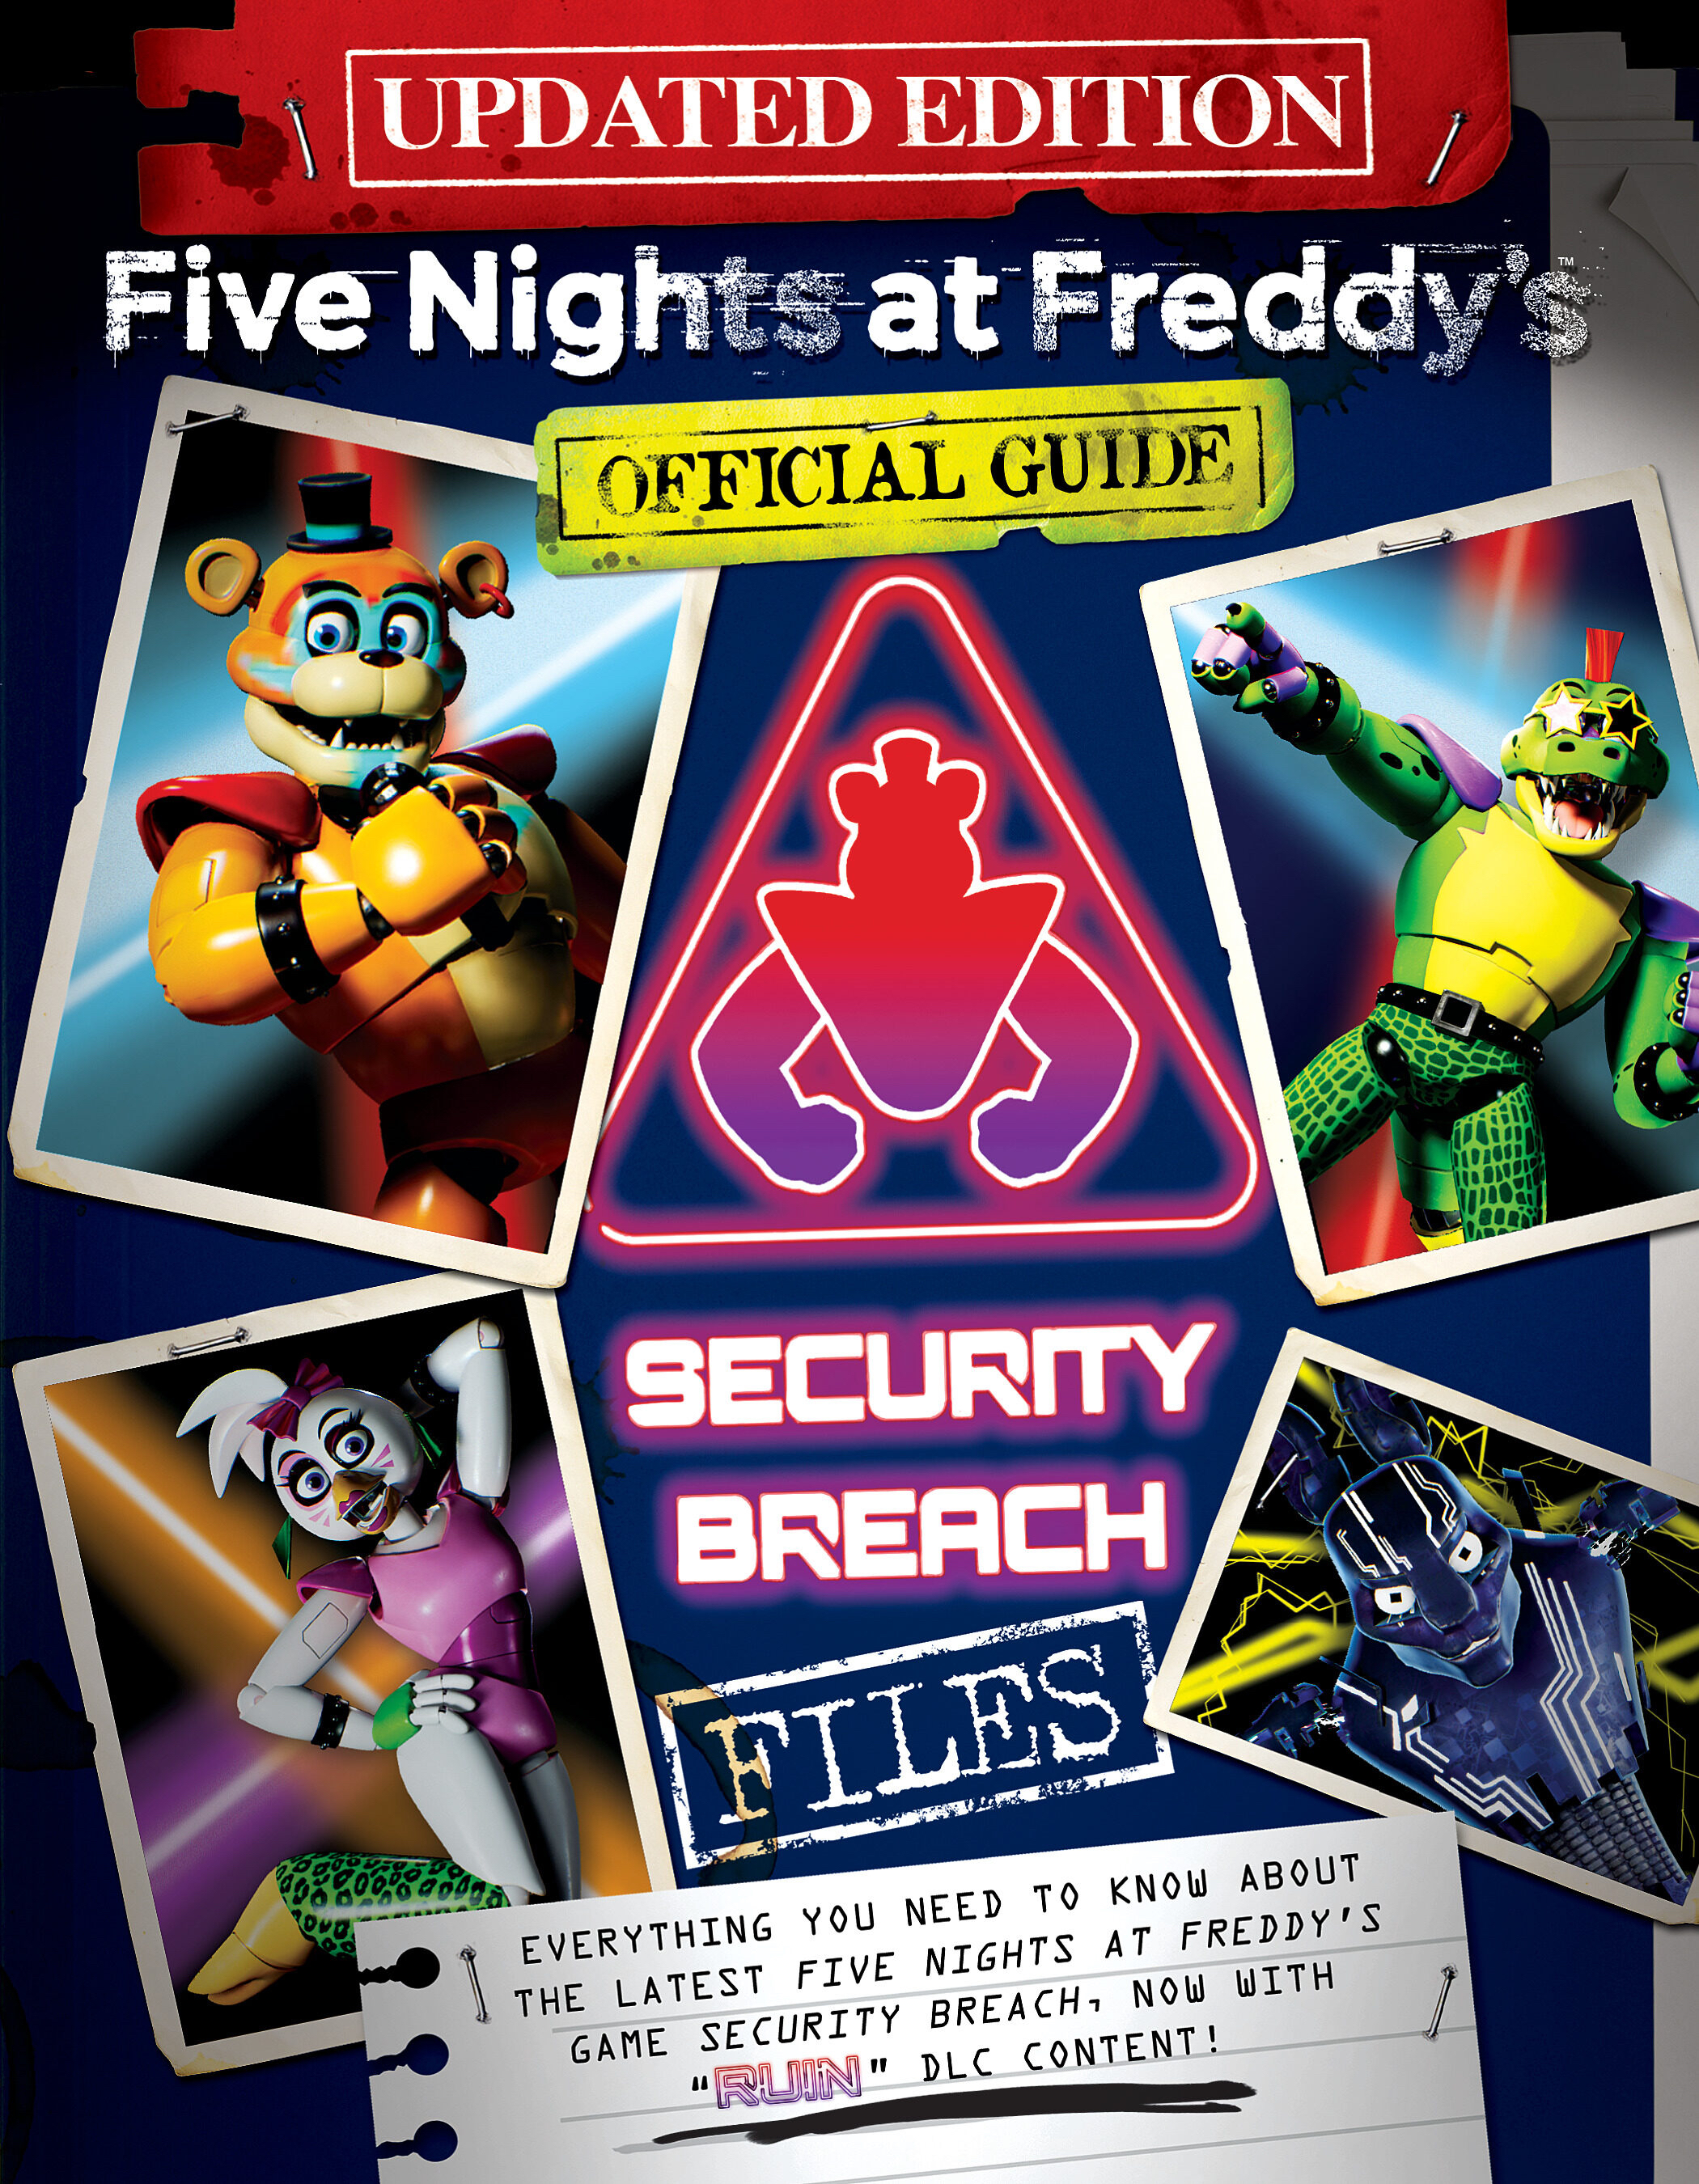 Five Nights at Freddy's - Security Breach (Revision)